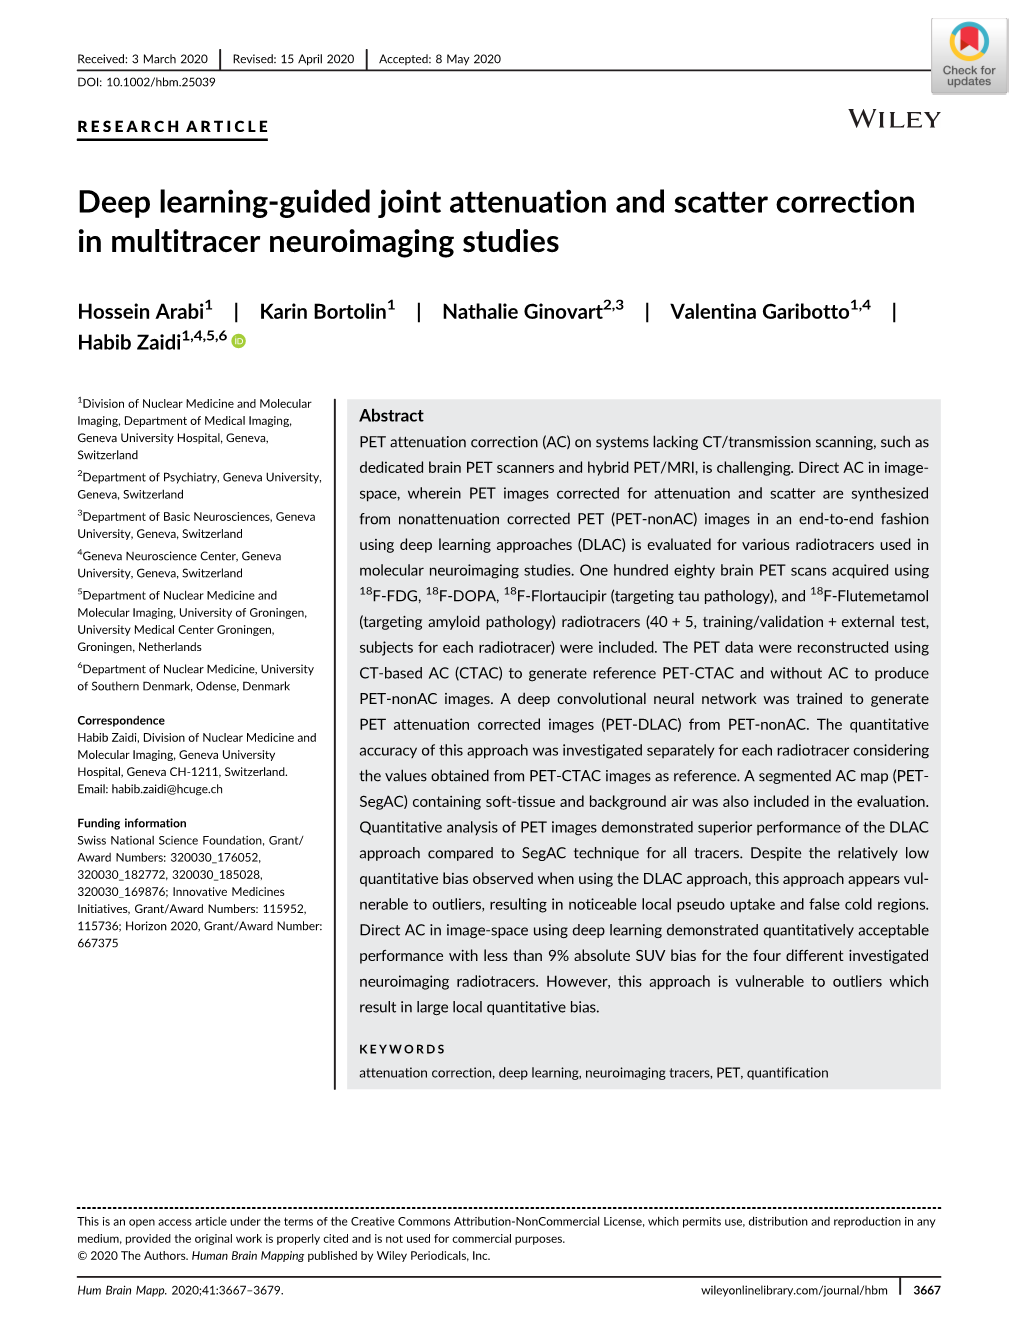 Deep Learning‐Guided Joint Attenuation and Scatter Correction